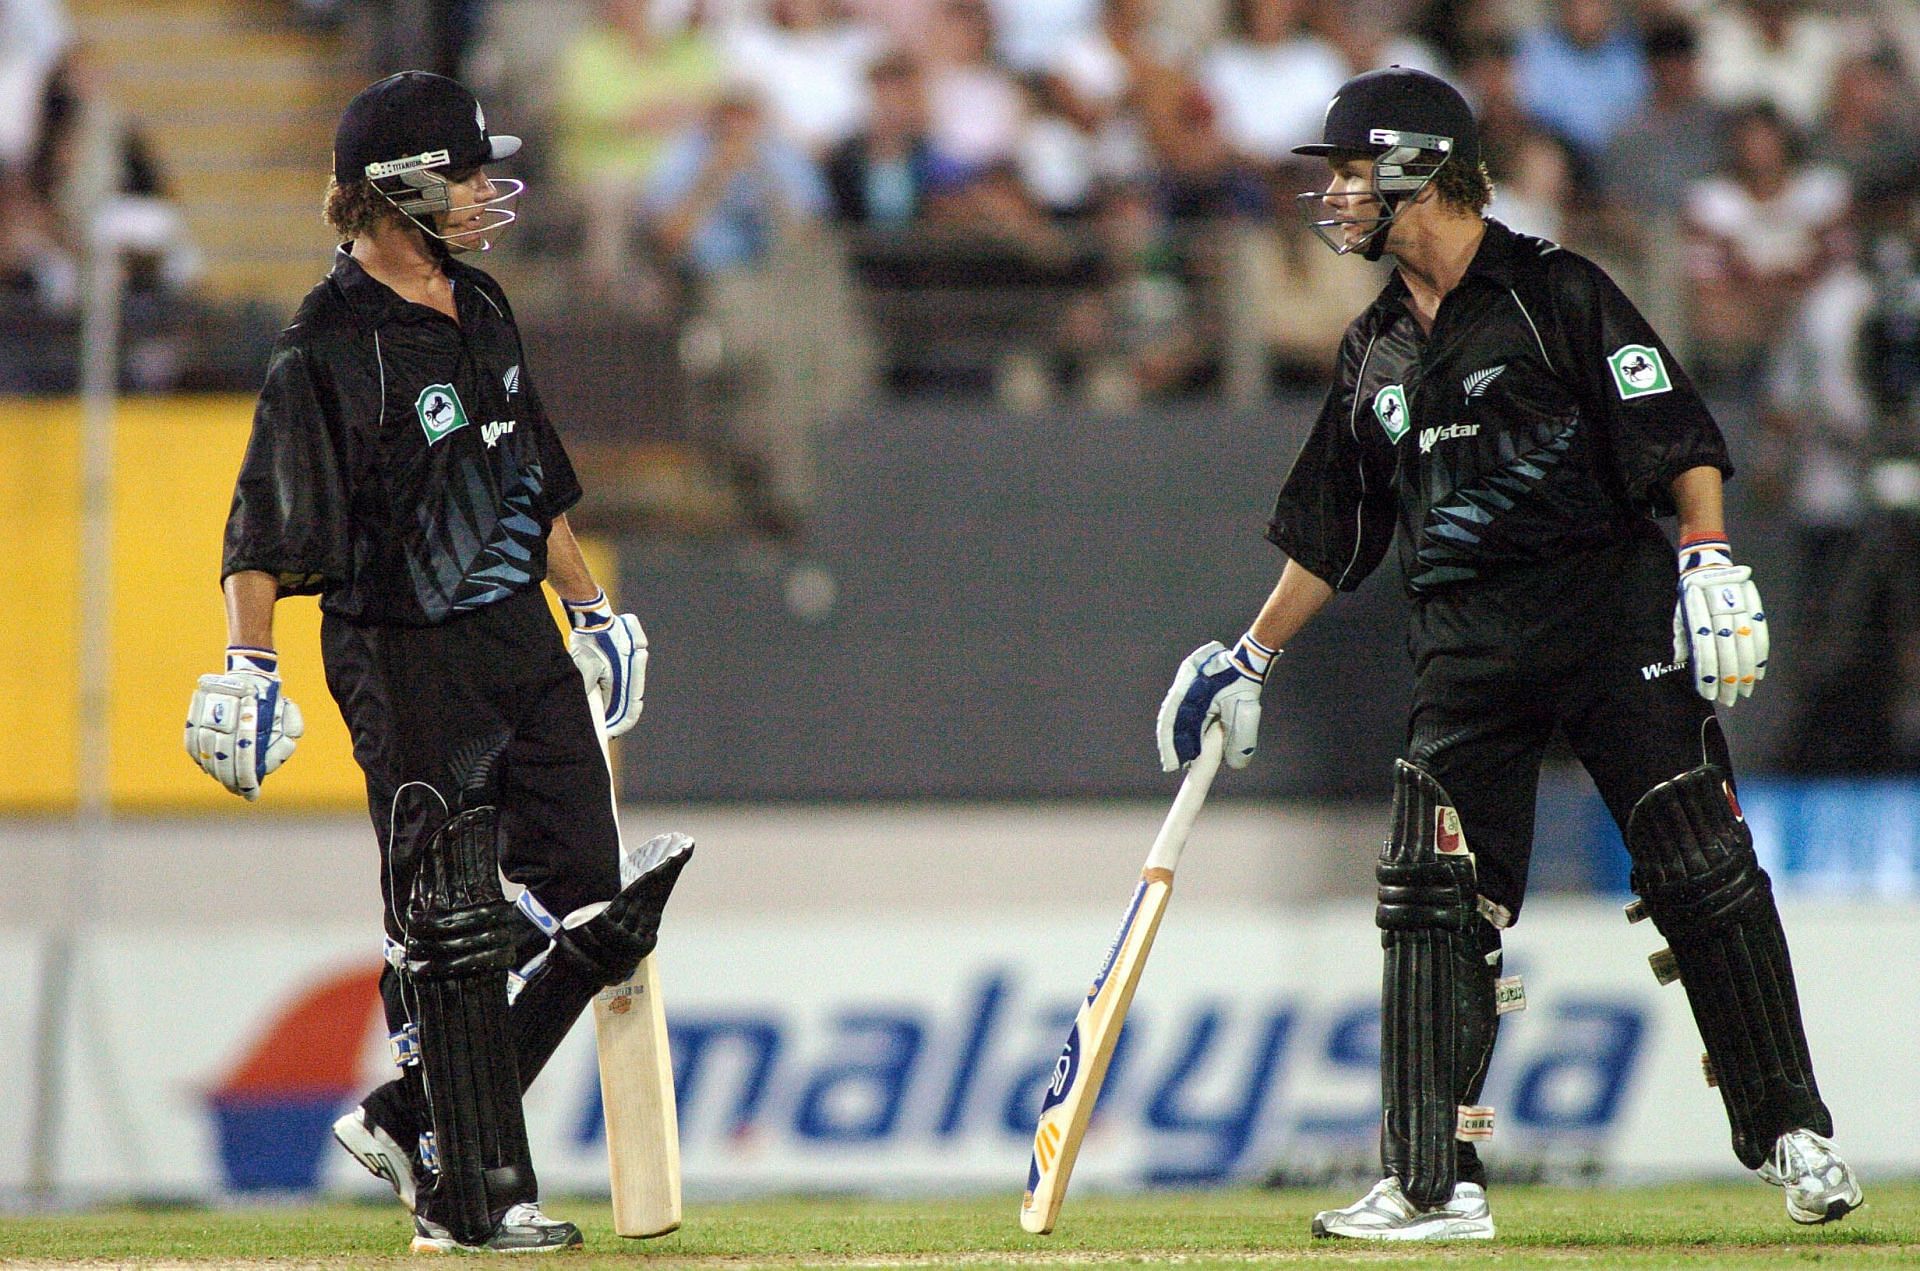 Hamish Marshall (left) and his brother James during an ODI against Australia in 2005. Pic: Getty Images